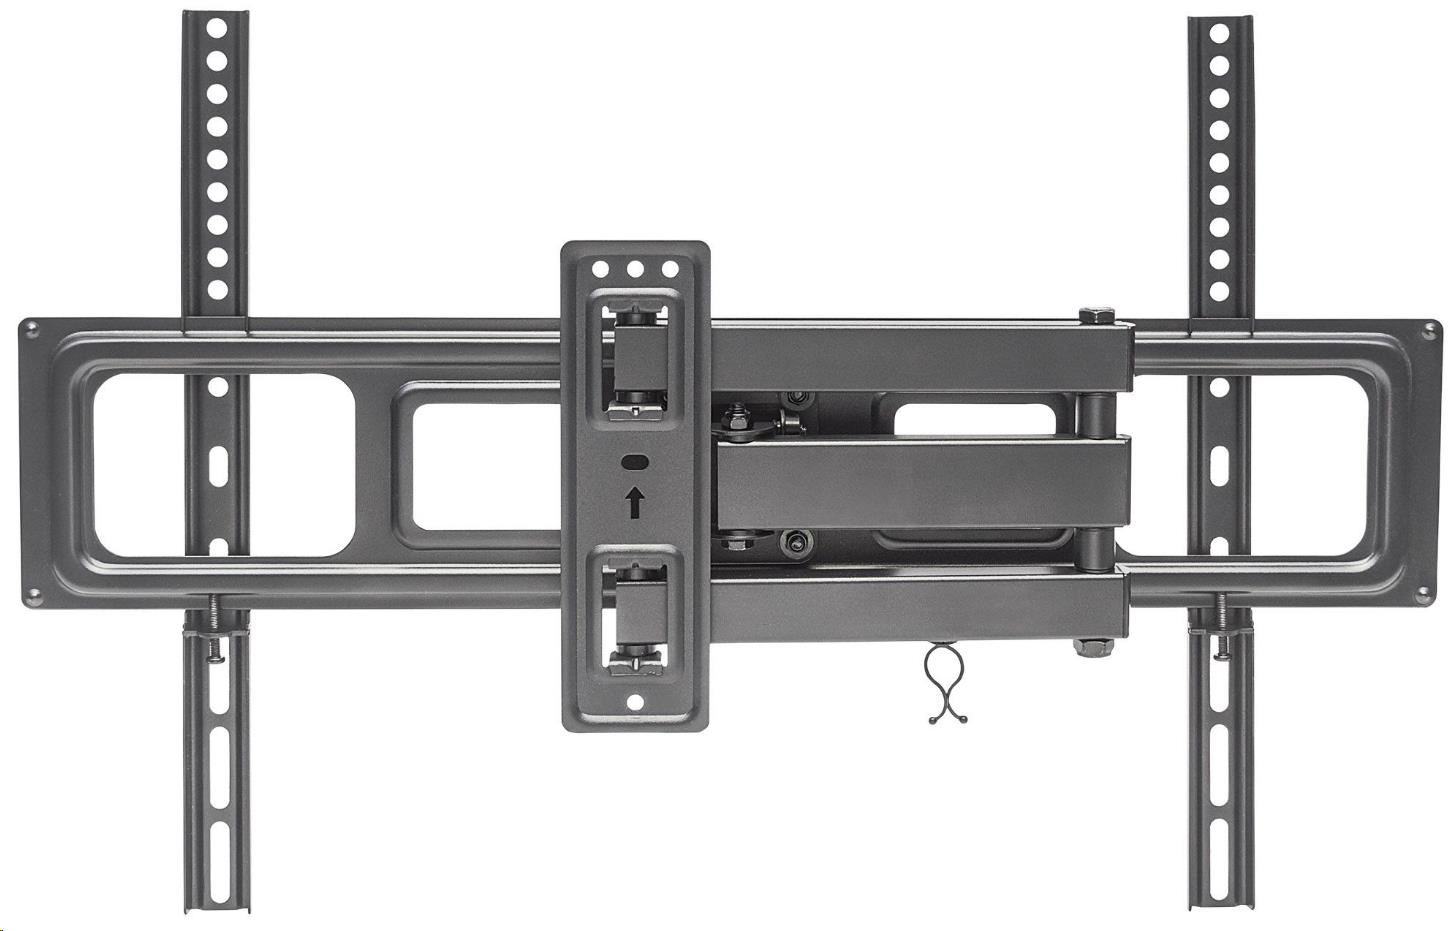 Manhattan LCD Wall Mount for 37